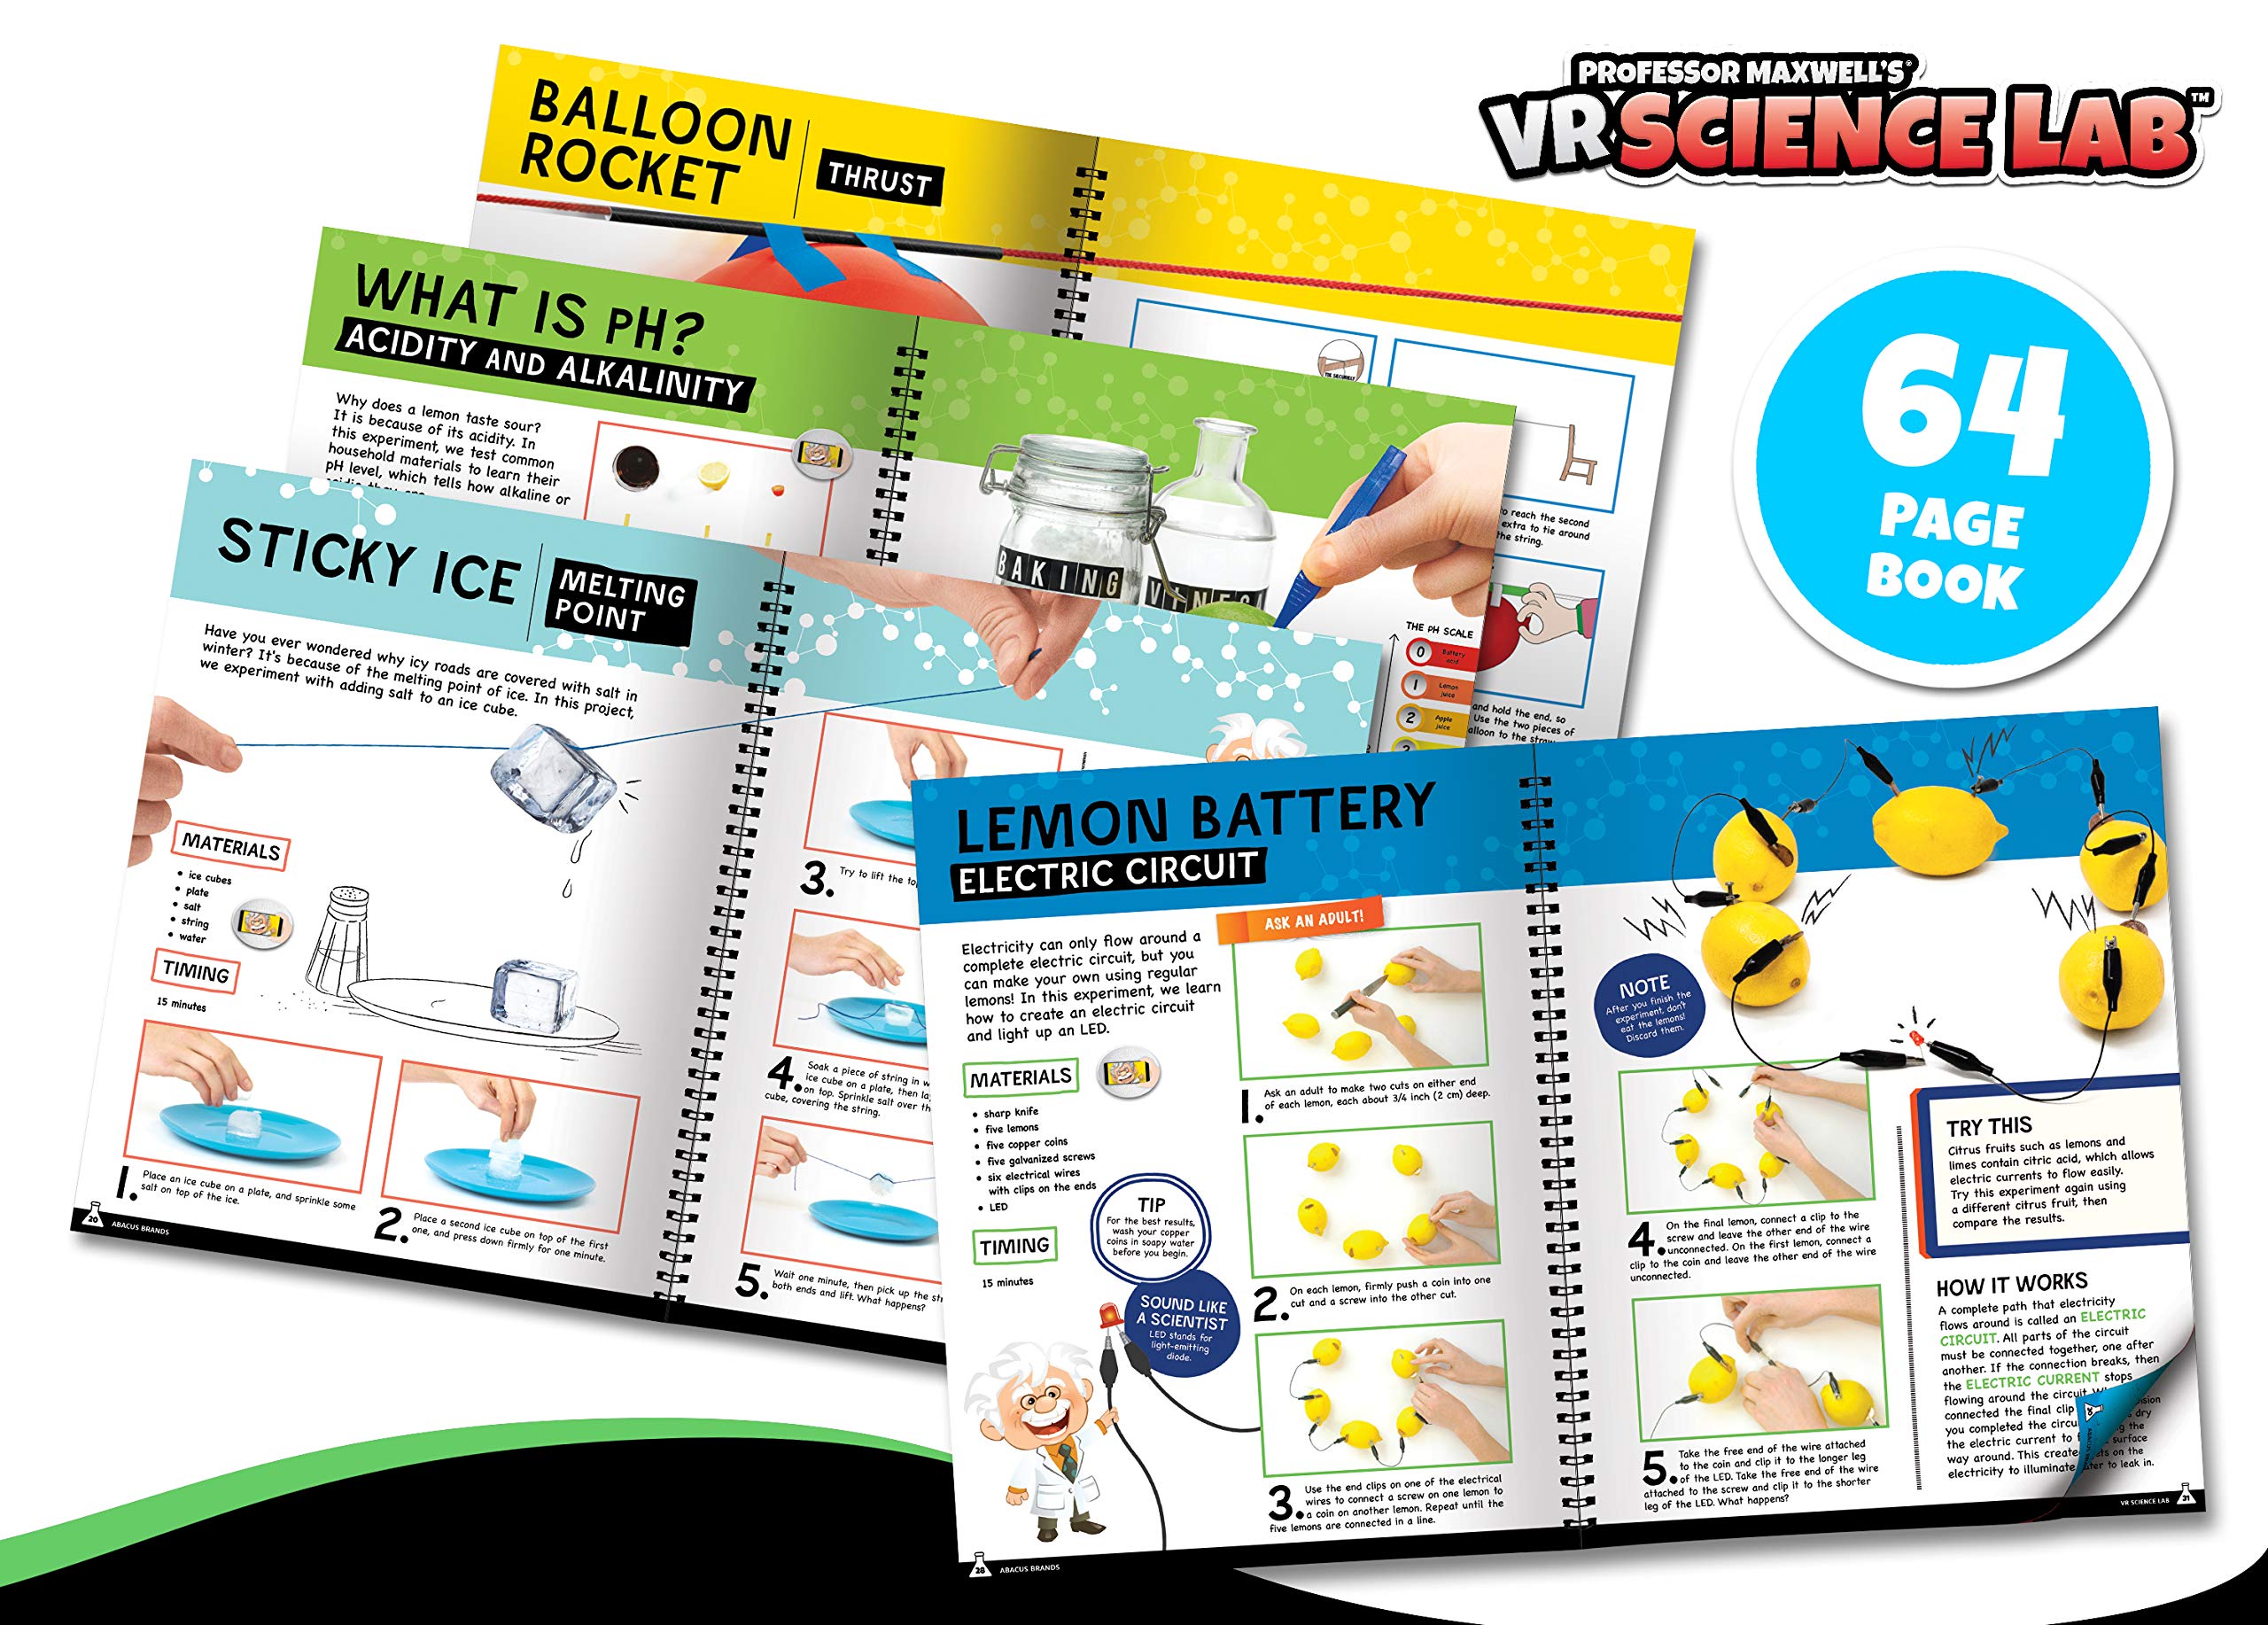 360 Virtual Reality Interactive Science Lab